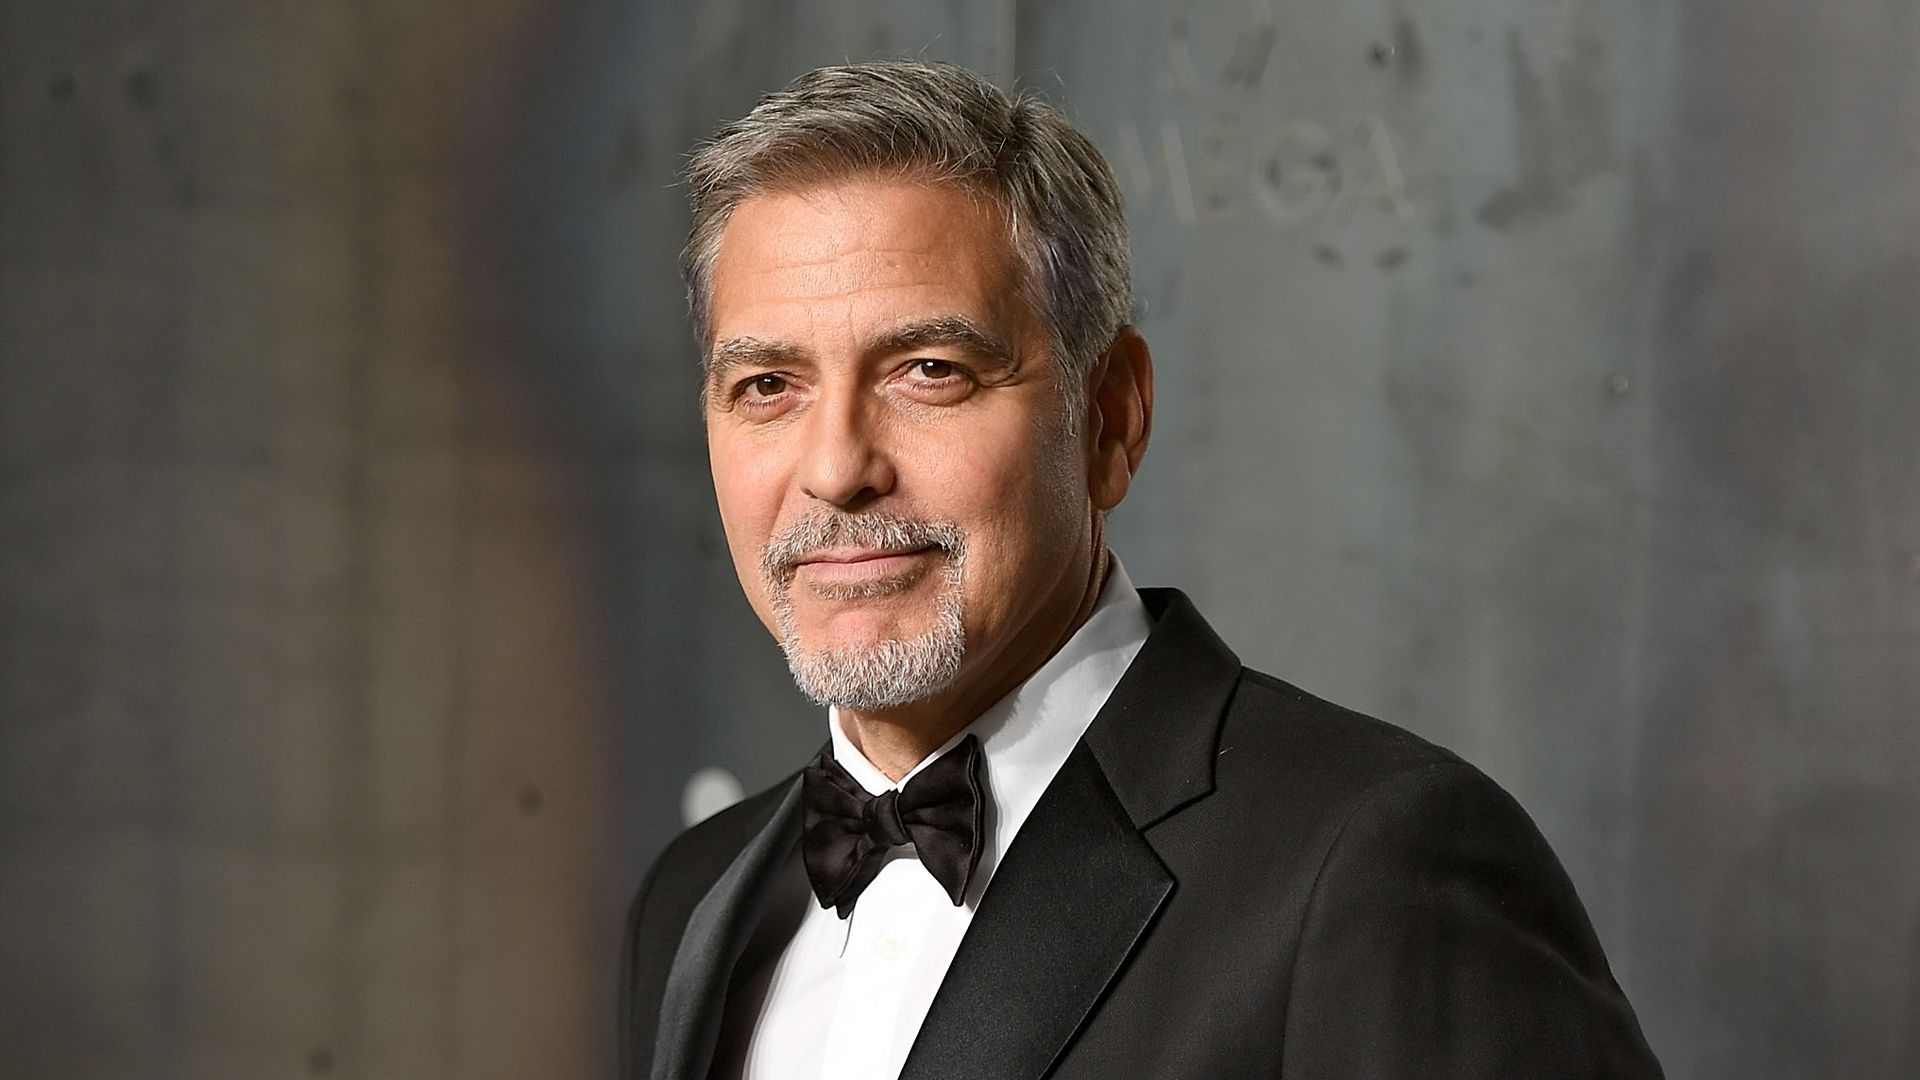 George Clooney attends the OMEGA 'Lost In Space' dinner to celebrate the 60th anniversary of the OMEGA Speedmaster, which has been worn by every piloted NASA mission since 1965, at Tate Modern on April 26, 2017 in London, England